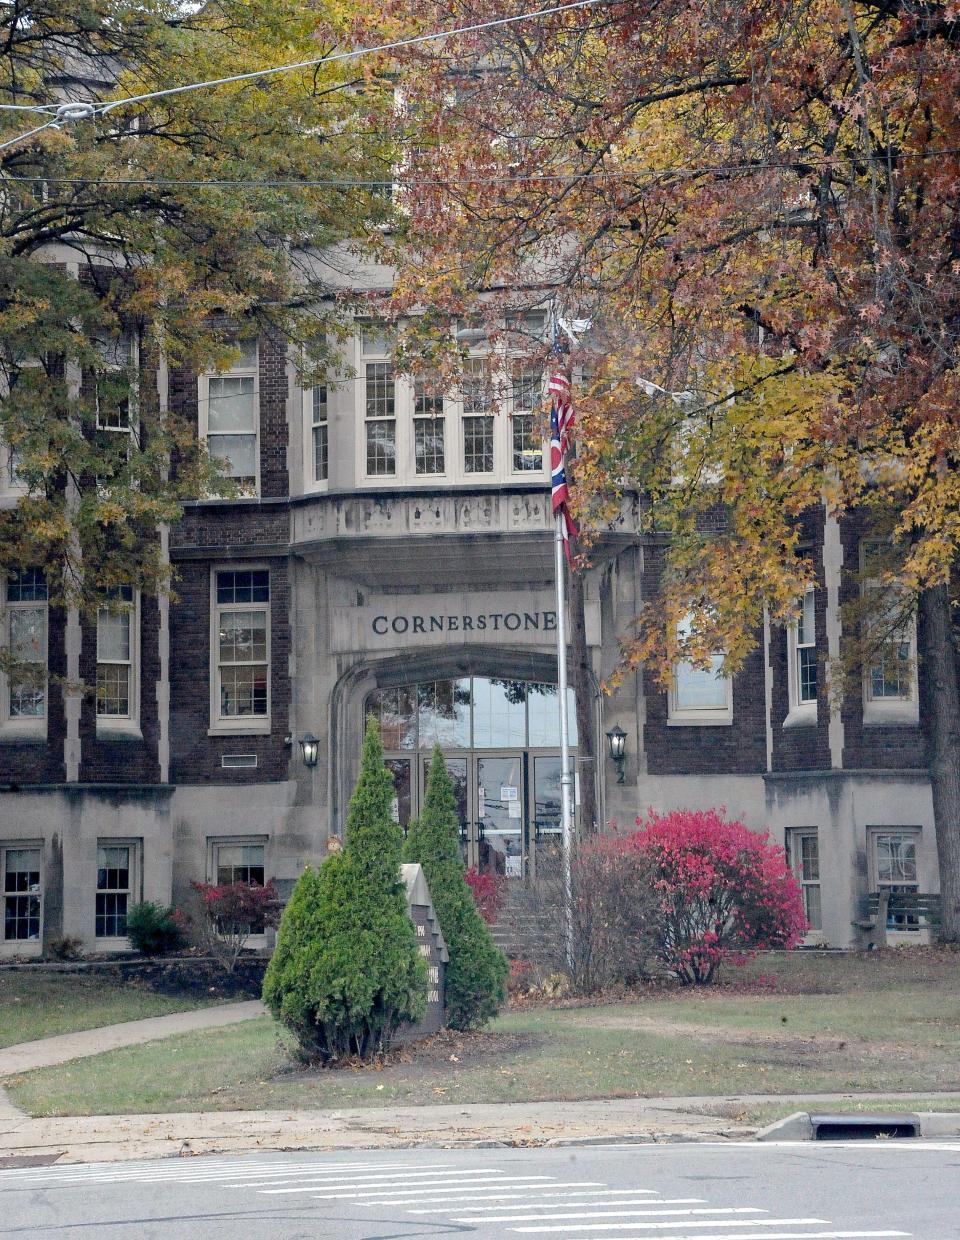 Some residents of the Wooster City School District have voiced opposition to a proposed plan to demolish a portion of Cornerstone Elementary as part of the district's master plan for facilities.